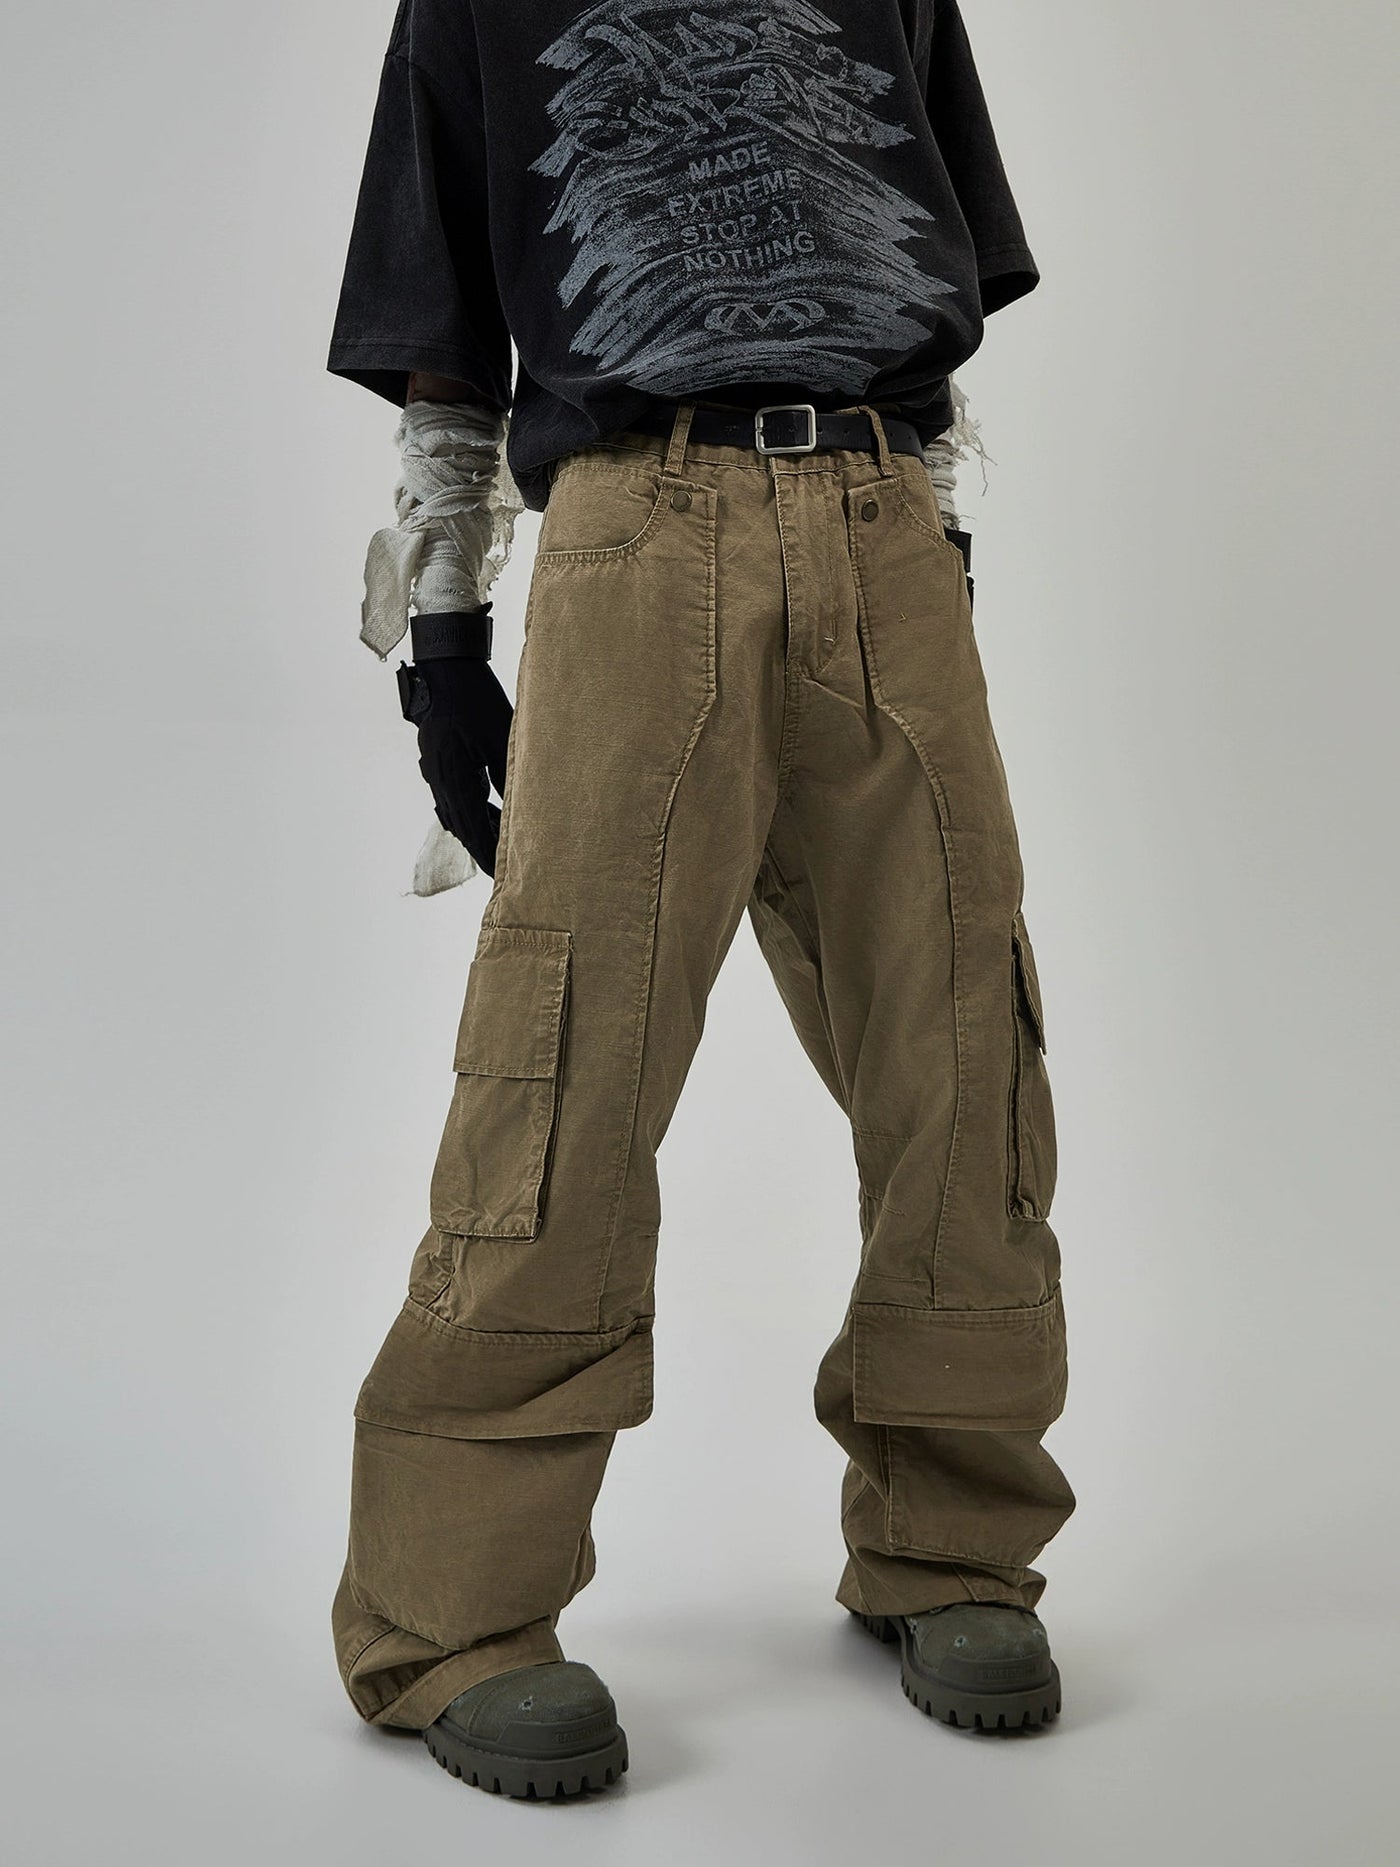 Solid Heavy Washed Cargo Pants Korean Street Fashion Pants By Ash Dark Shop Online at OH Vault